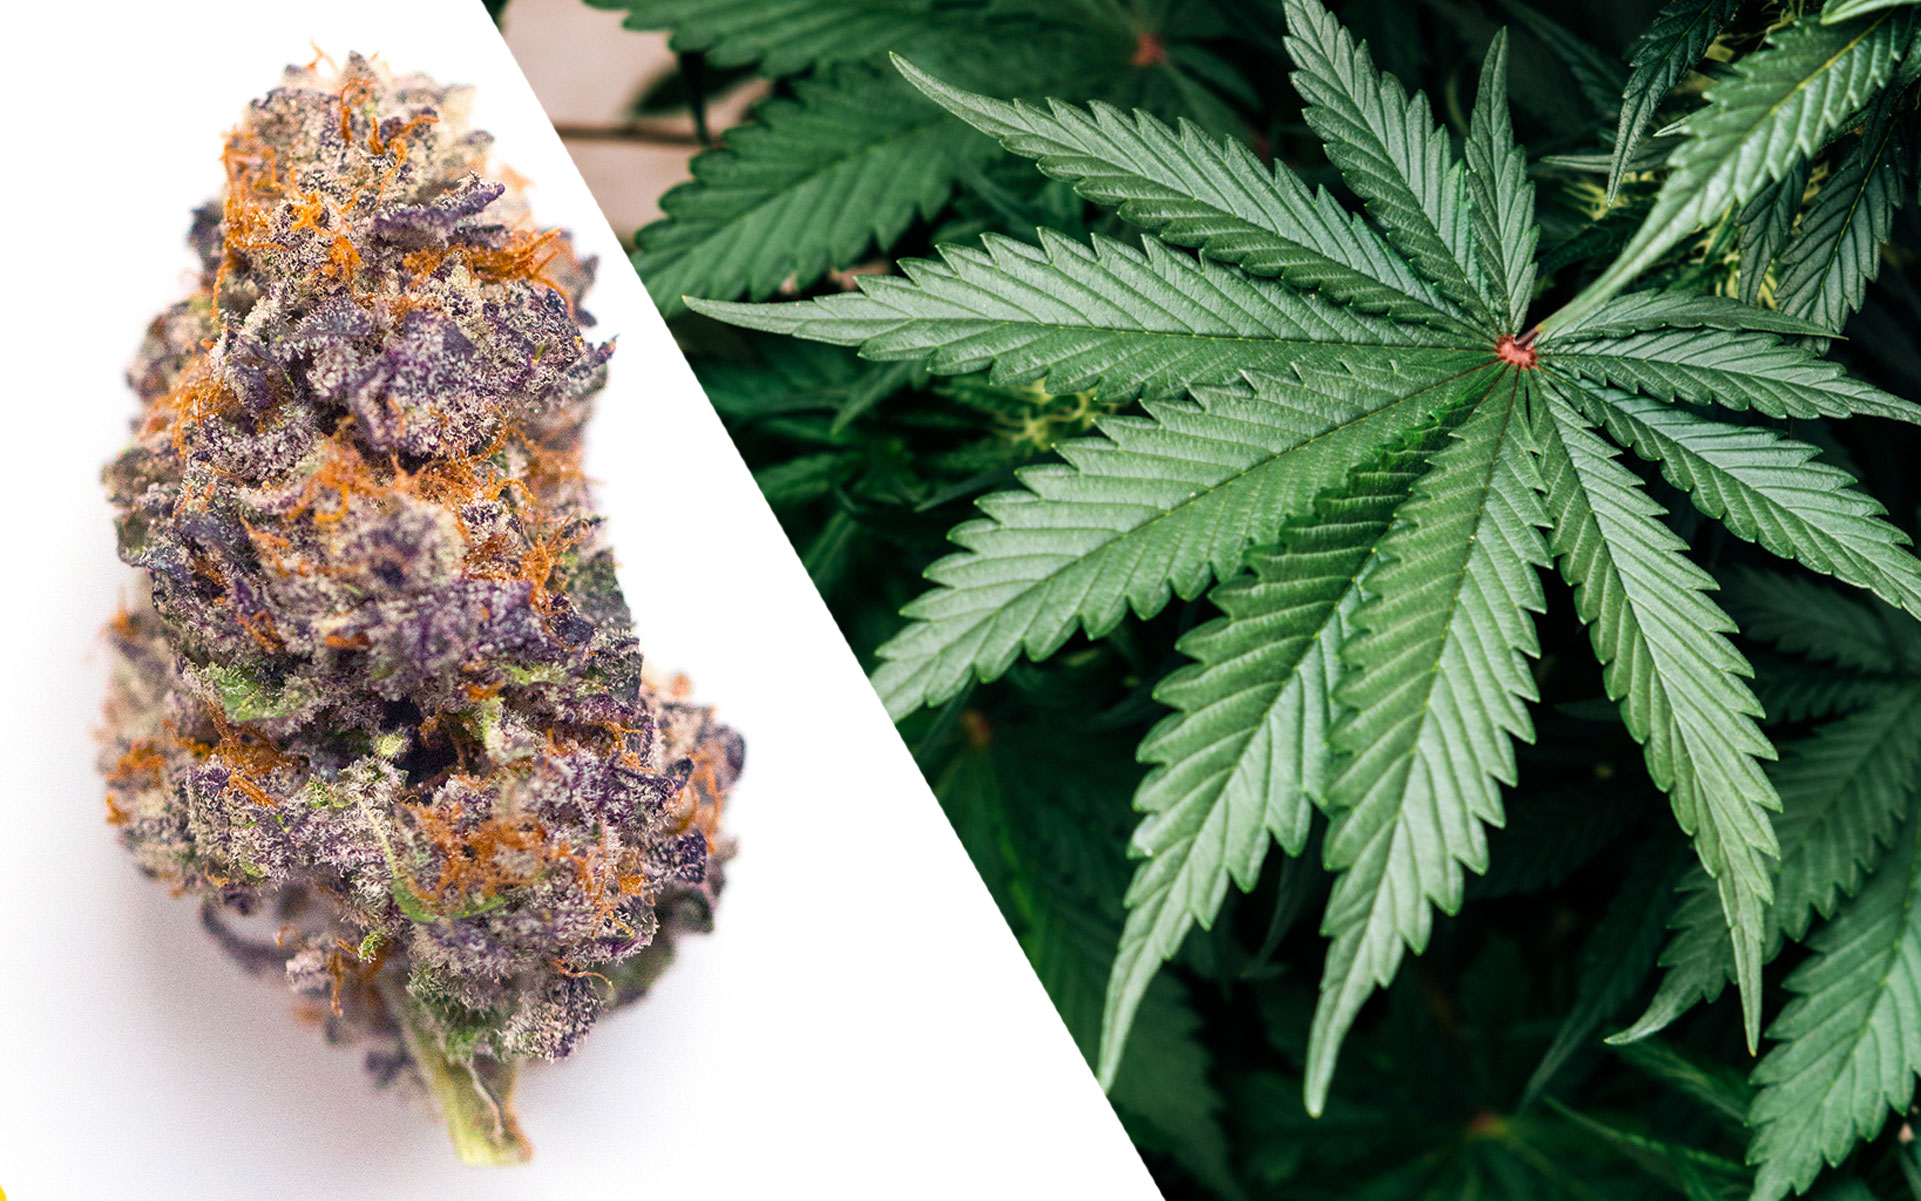 10 Facts About THC and Cannabis Strains